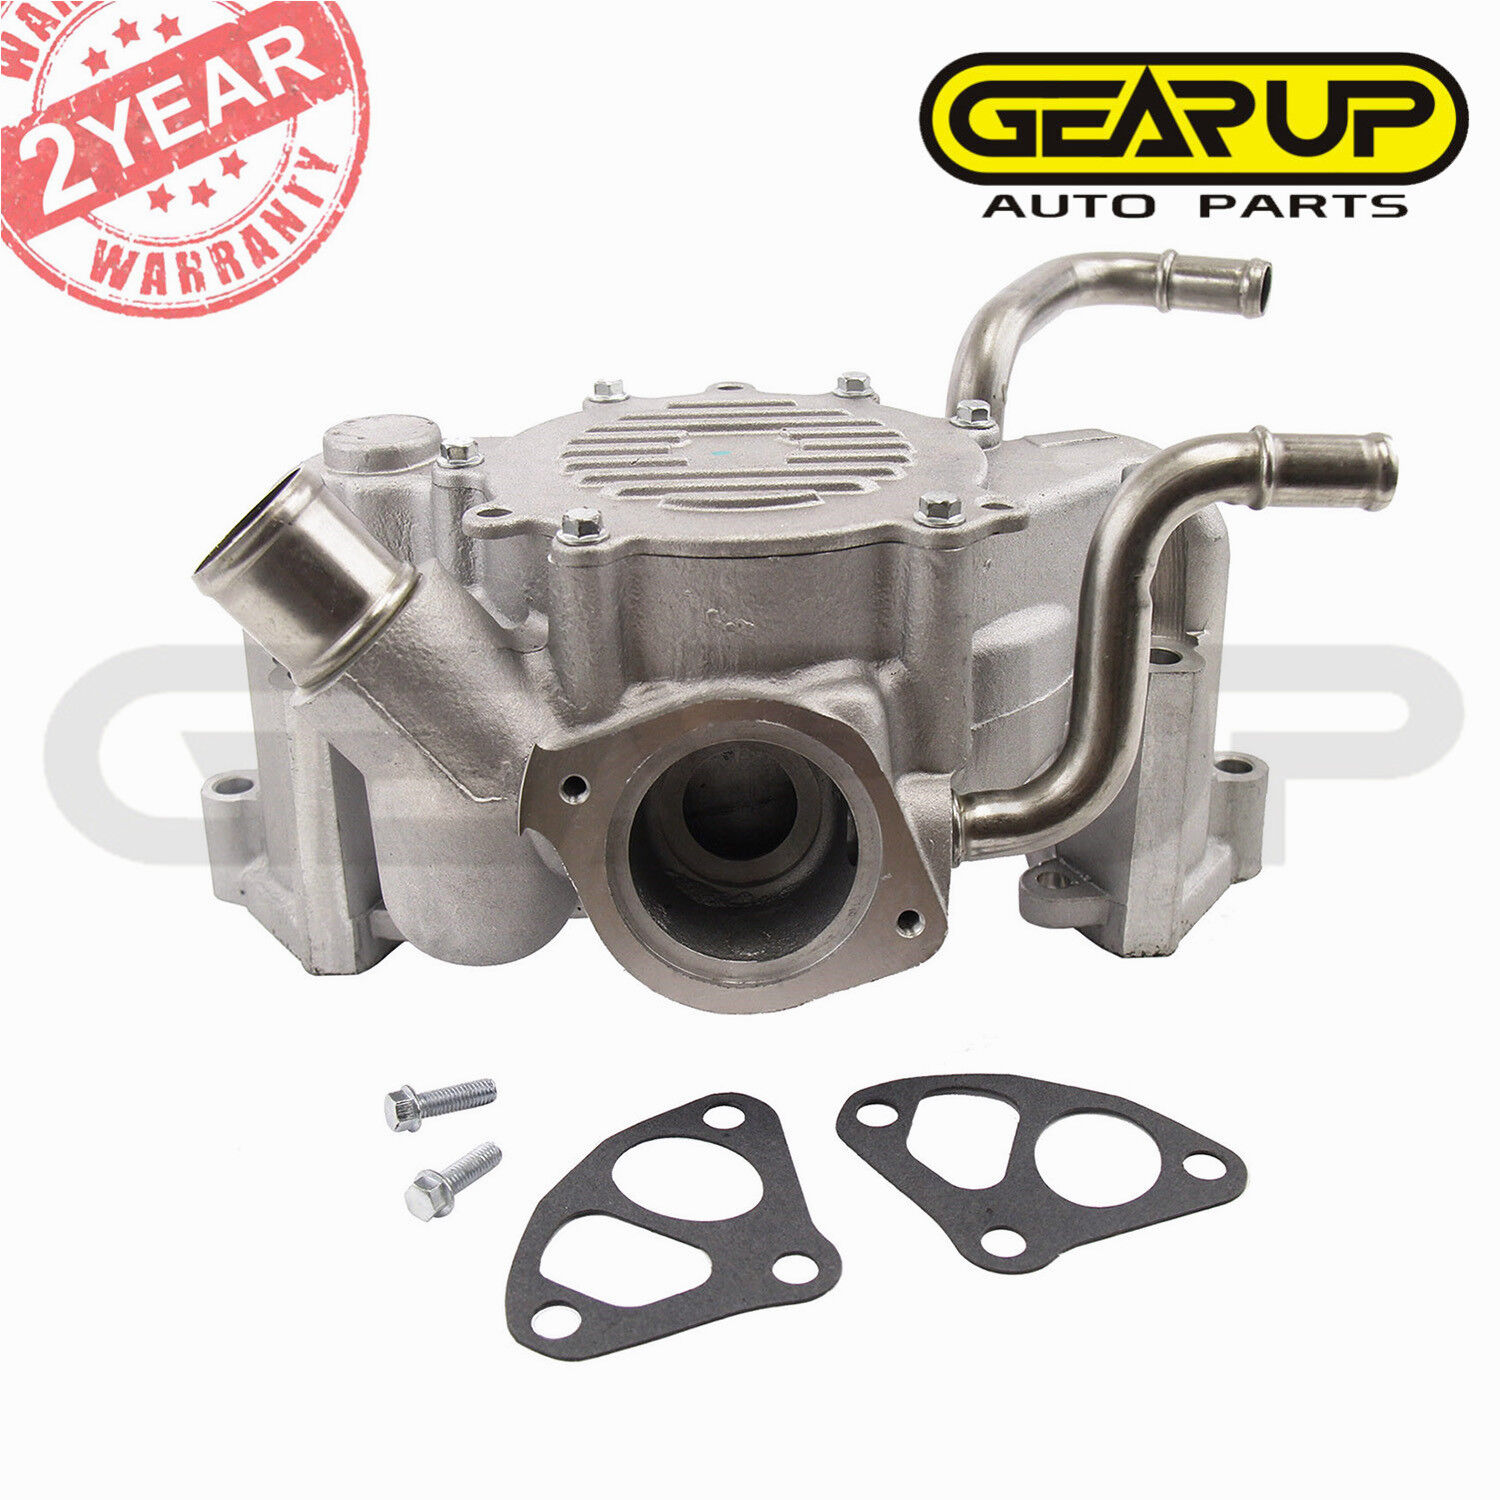 Engine Water Pump For 1994-1996 Roadmaster Cadillac Fleetwood Chevy Impala 5.7L